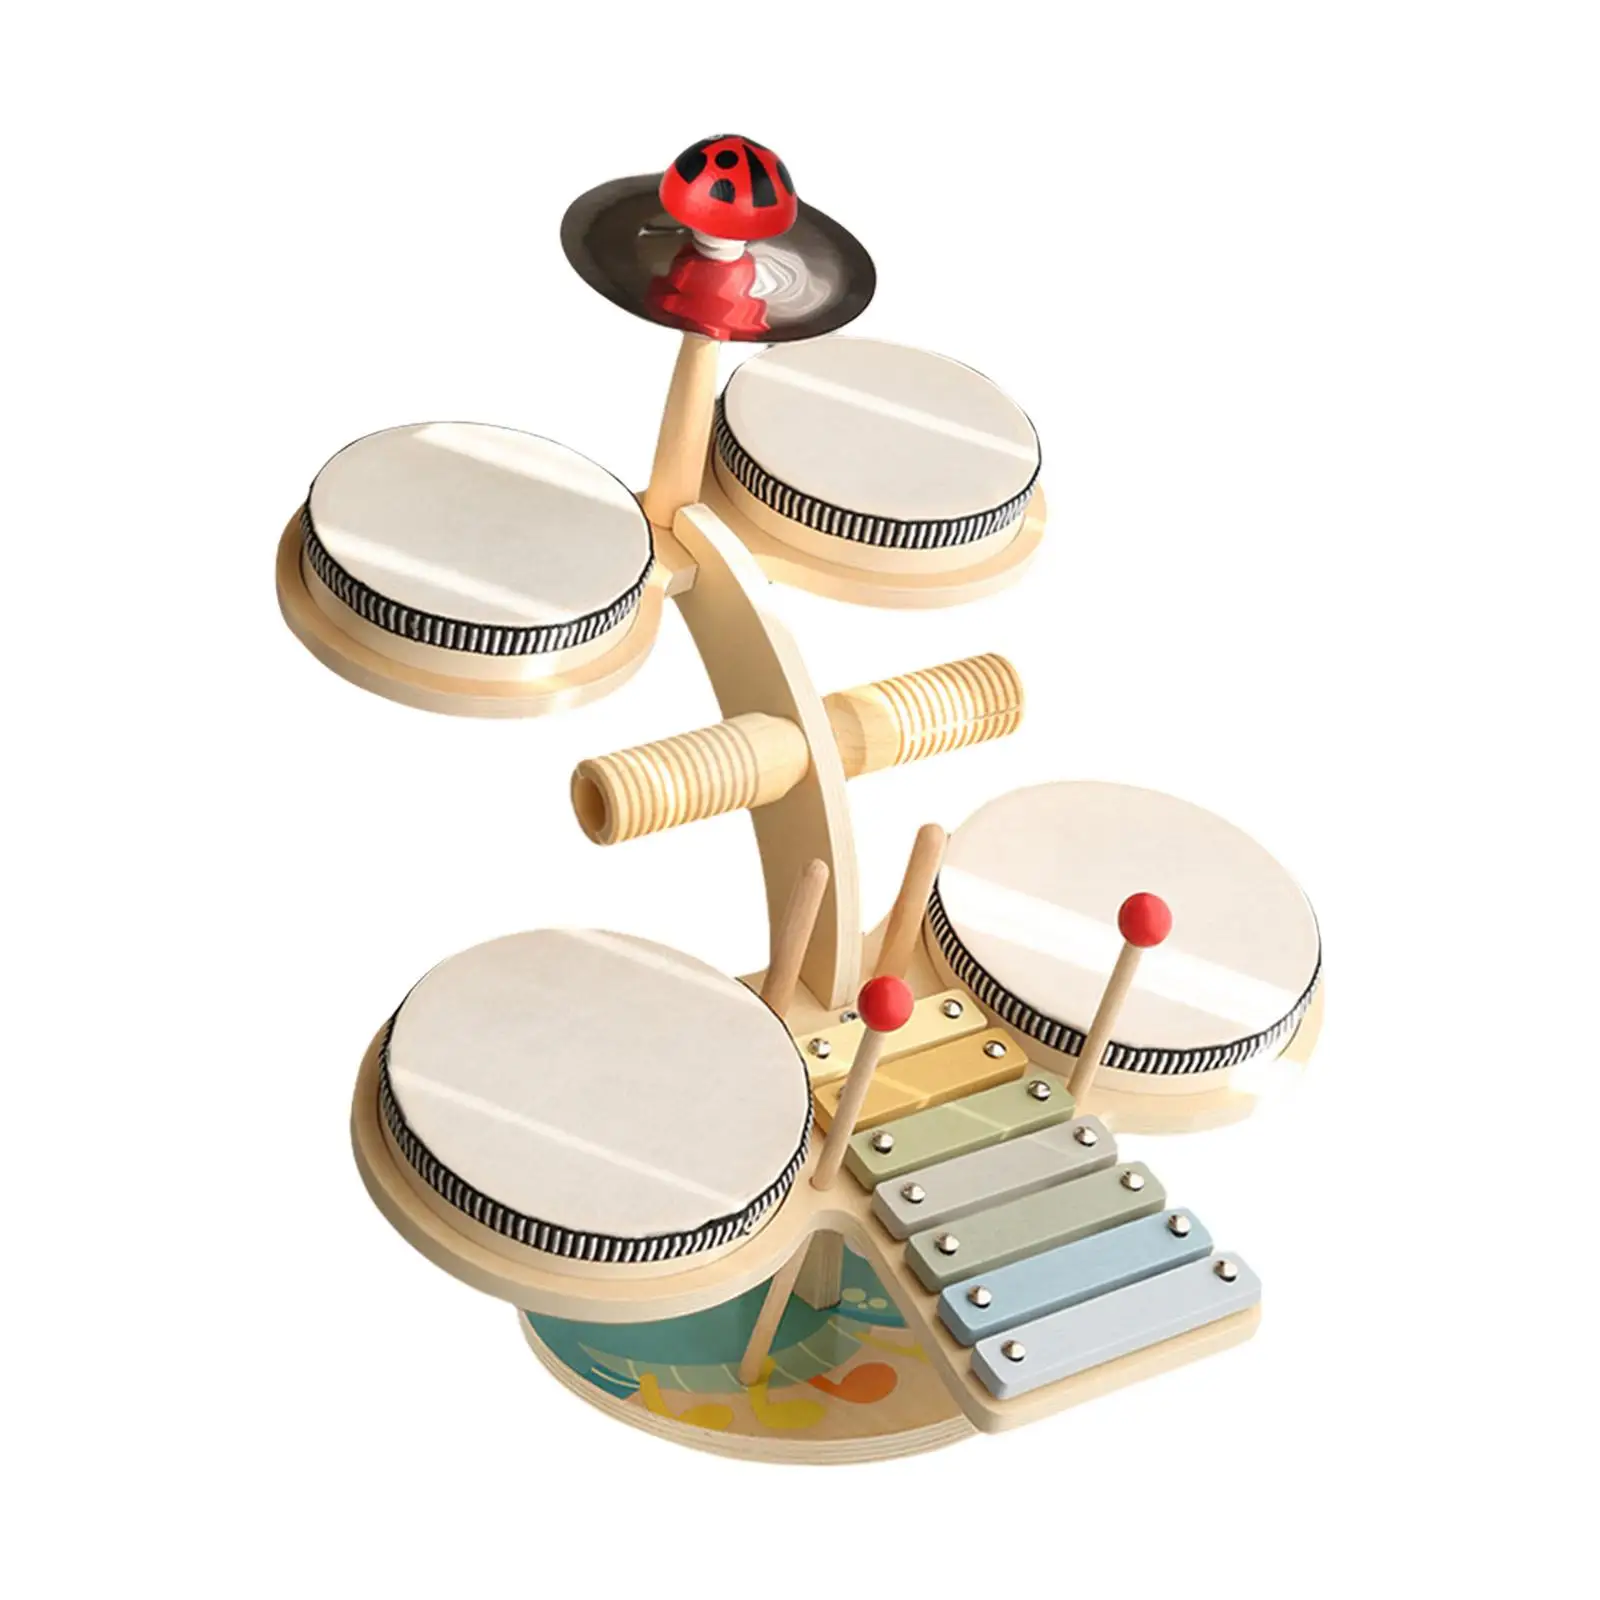 Xylophone Drum Set Percussion Toy Wooden Xylophone Musical Toy for Kids